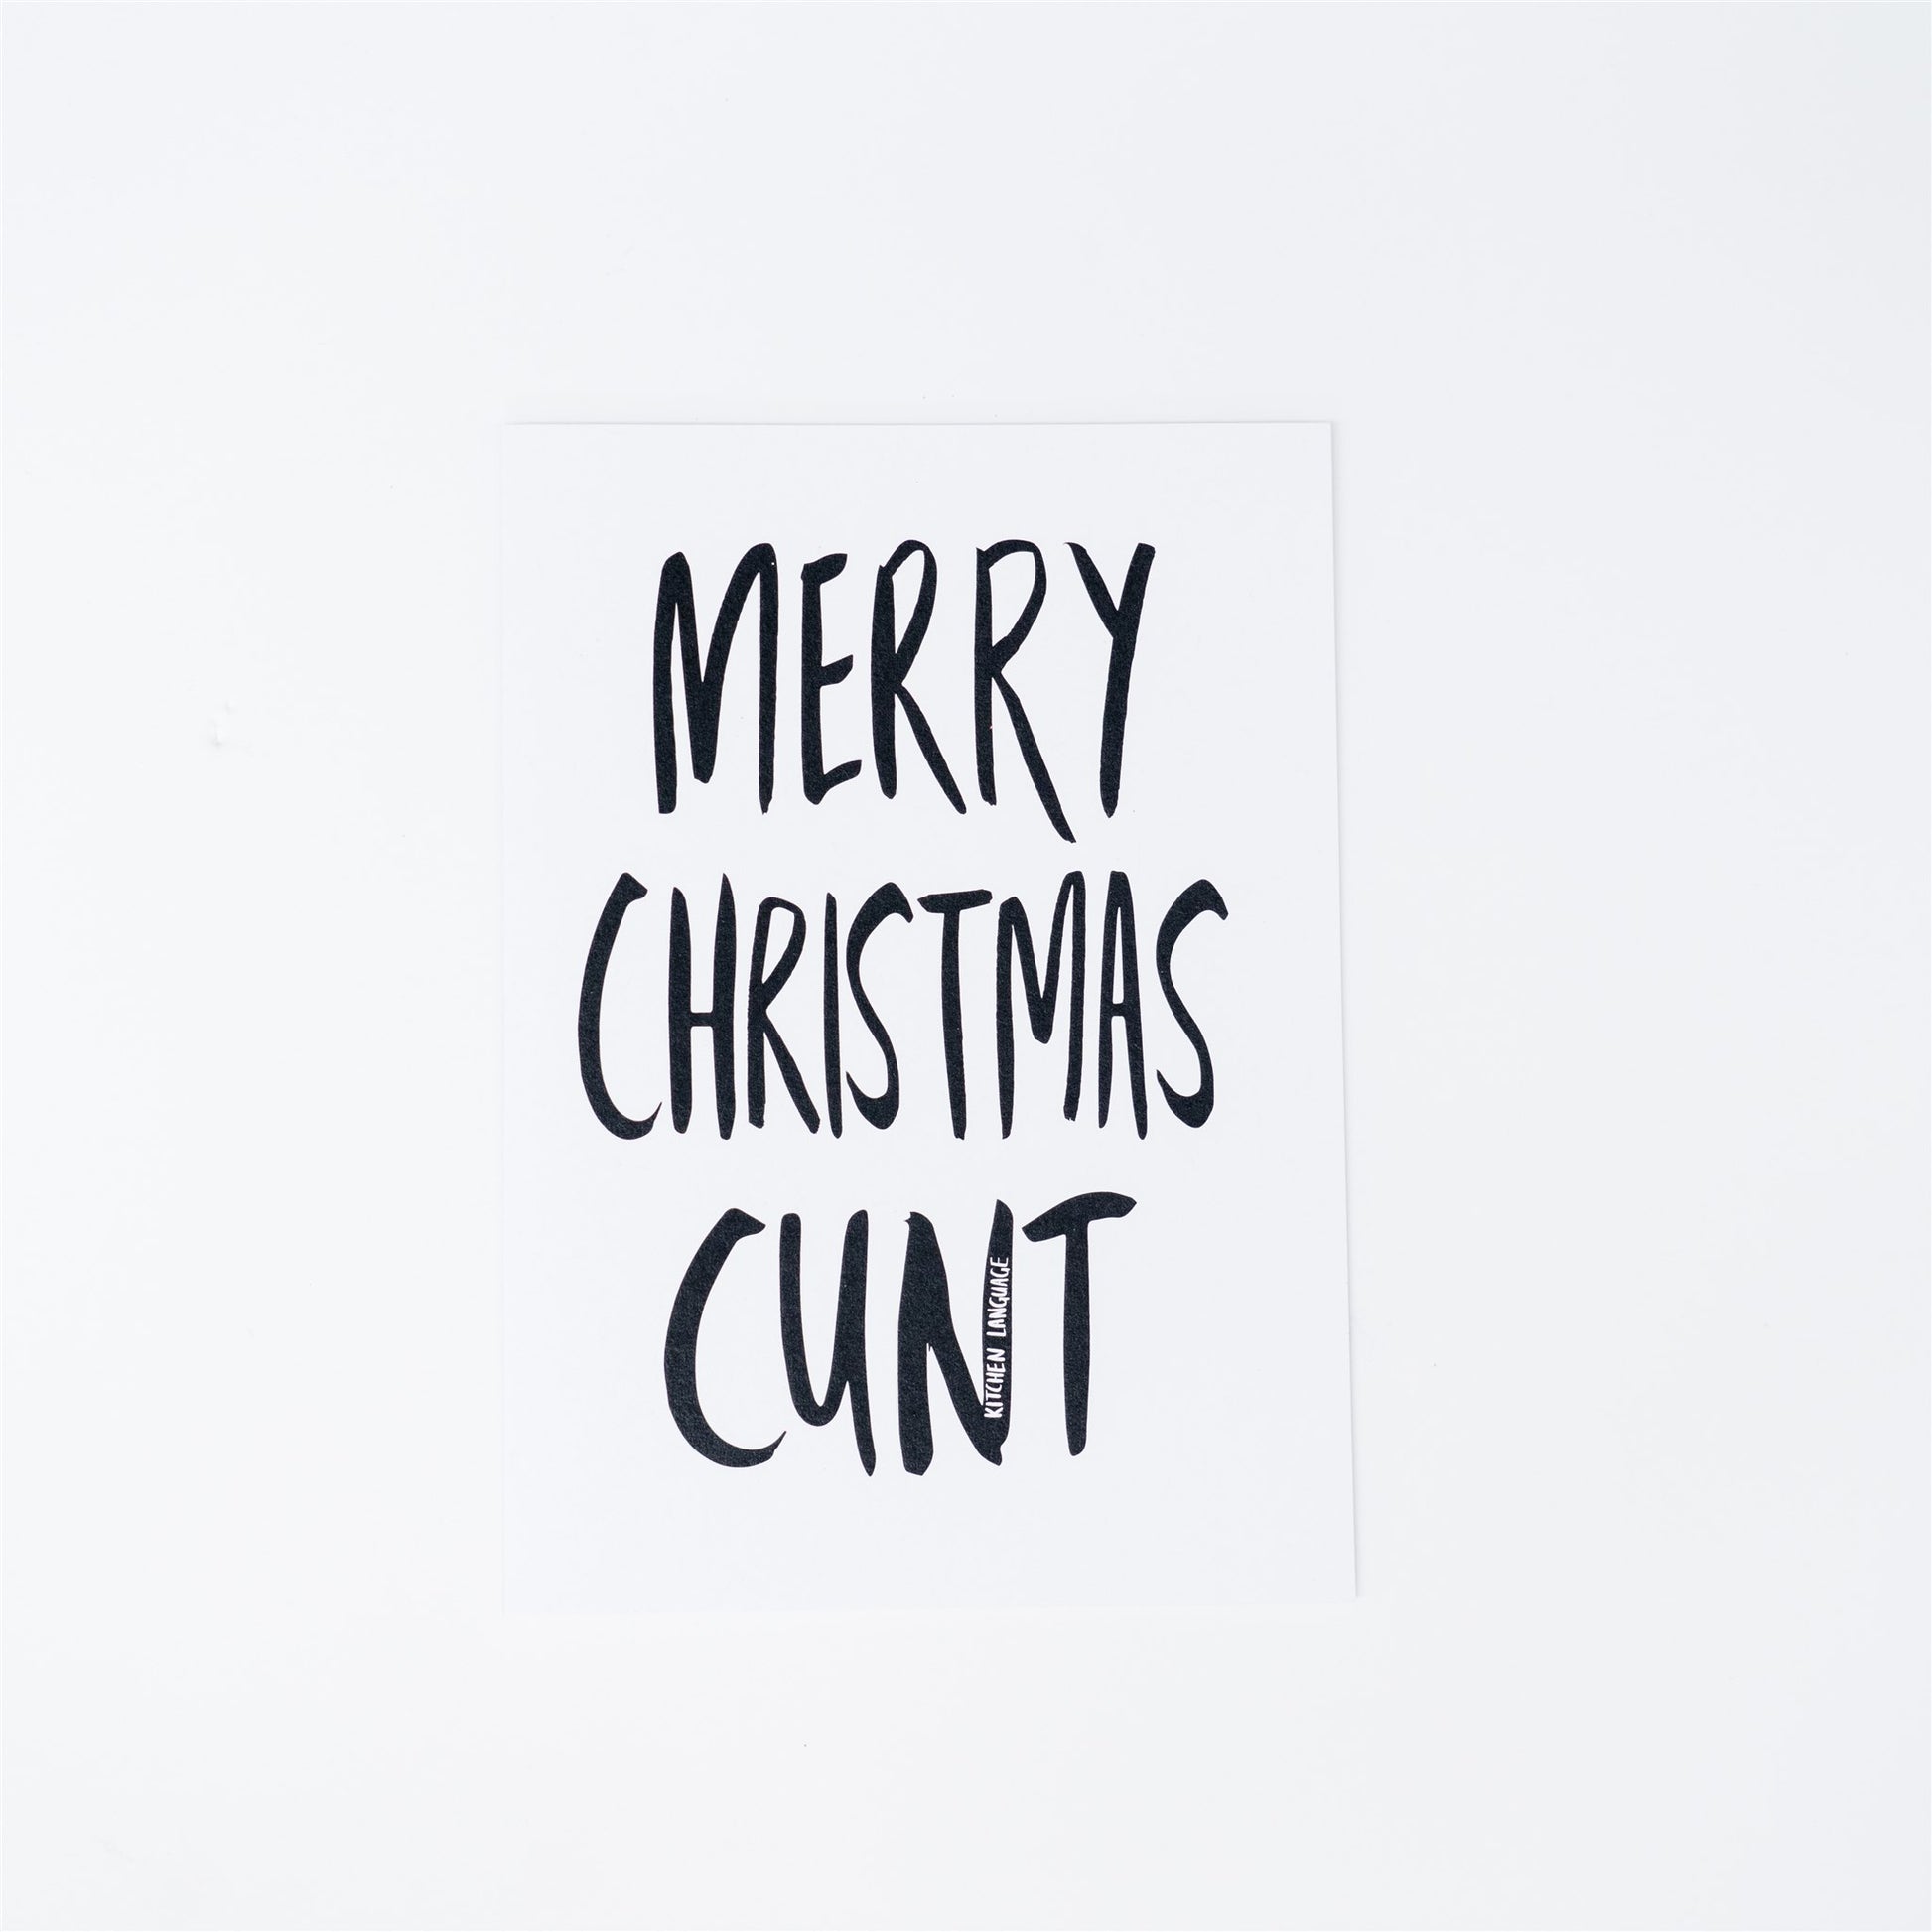 Merry Christmas Cunt- Christmas- greeting card- kitchen language